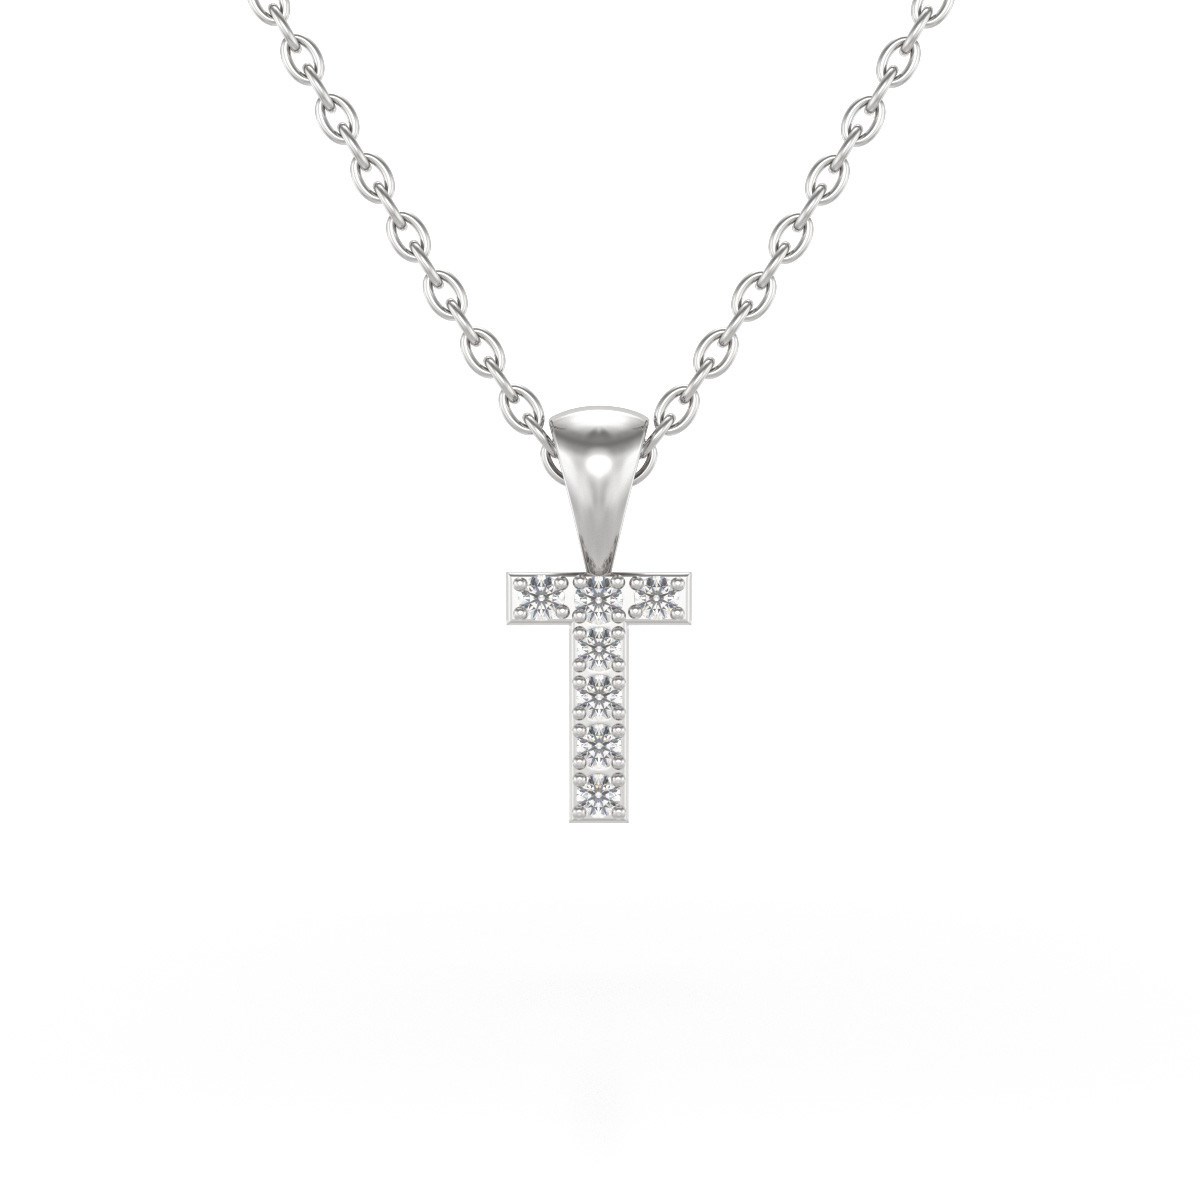 Collier Pendentif ADEN Lettre T Or 750 Blanc Diamant Chaine Or 750 incluse 0.72grs